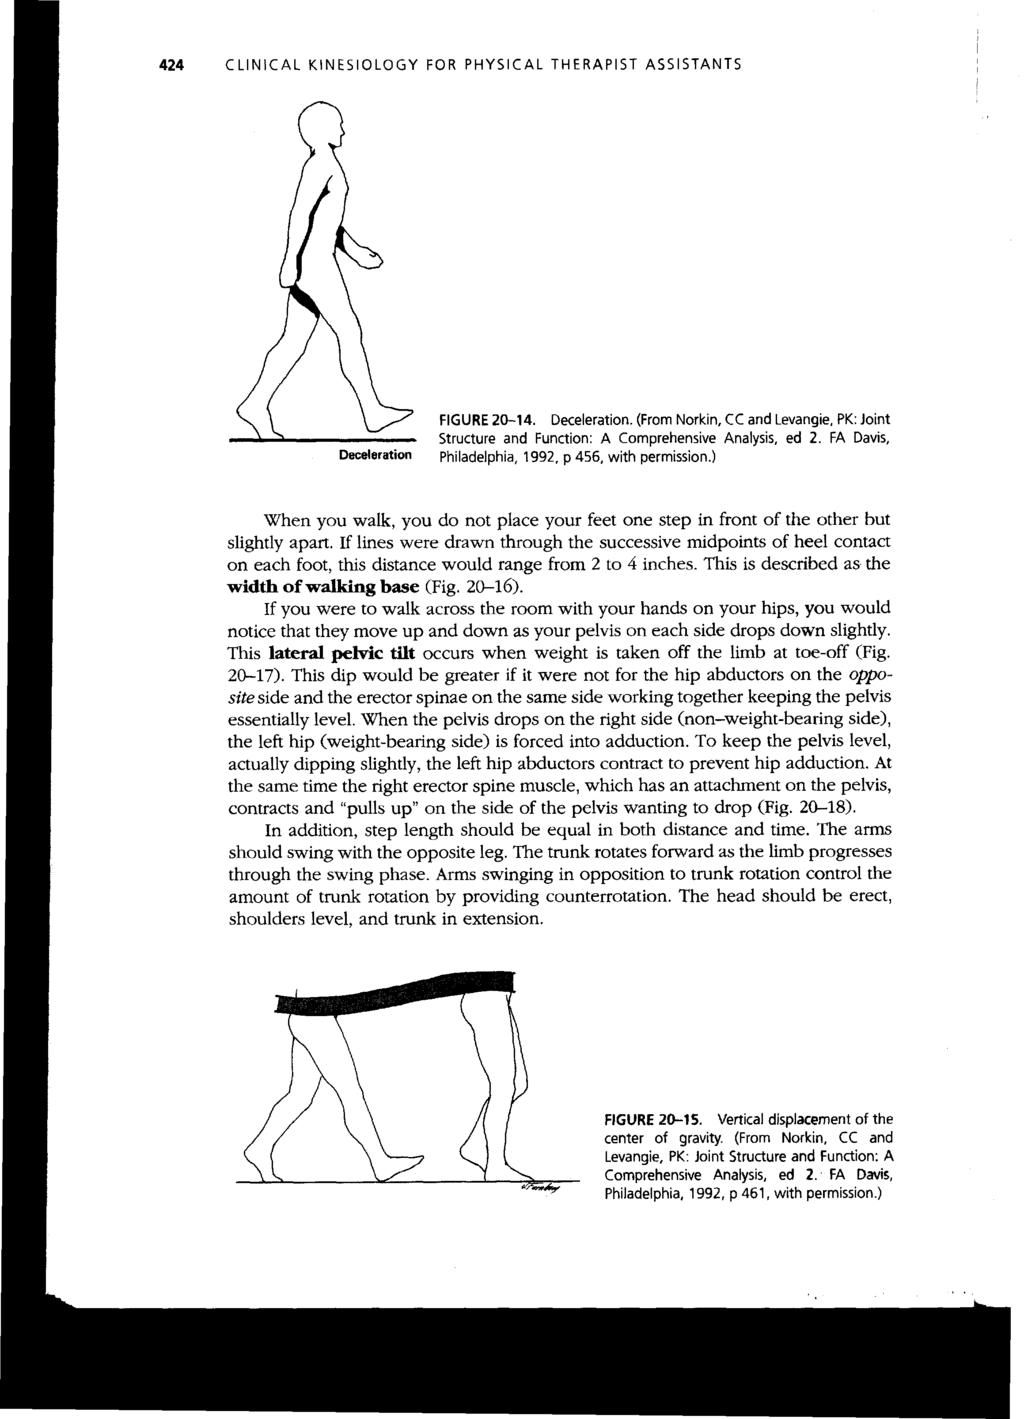 424 CLINICAL KINESIOLOGY FOR PHYSICAL THERAPIST ASSISTANTS FIGURE 20-14. Deceleration. (From Norkin, CC and Levangie, PK: Joint Structure and Function: A Comprehensive Analysis, ed 2.